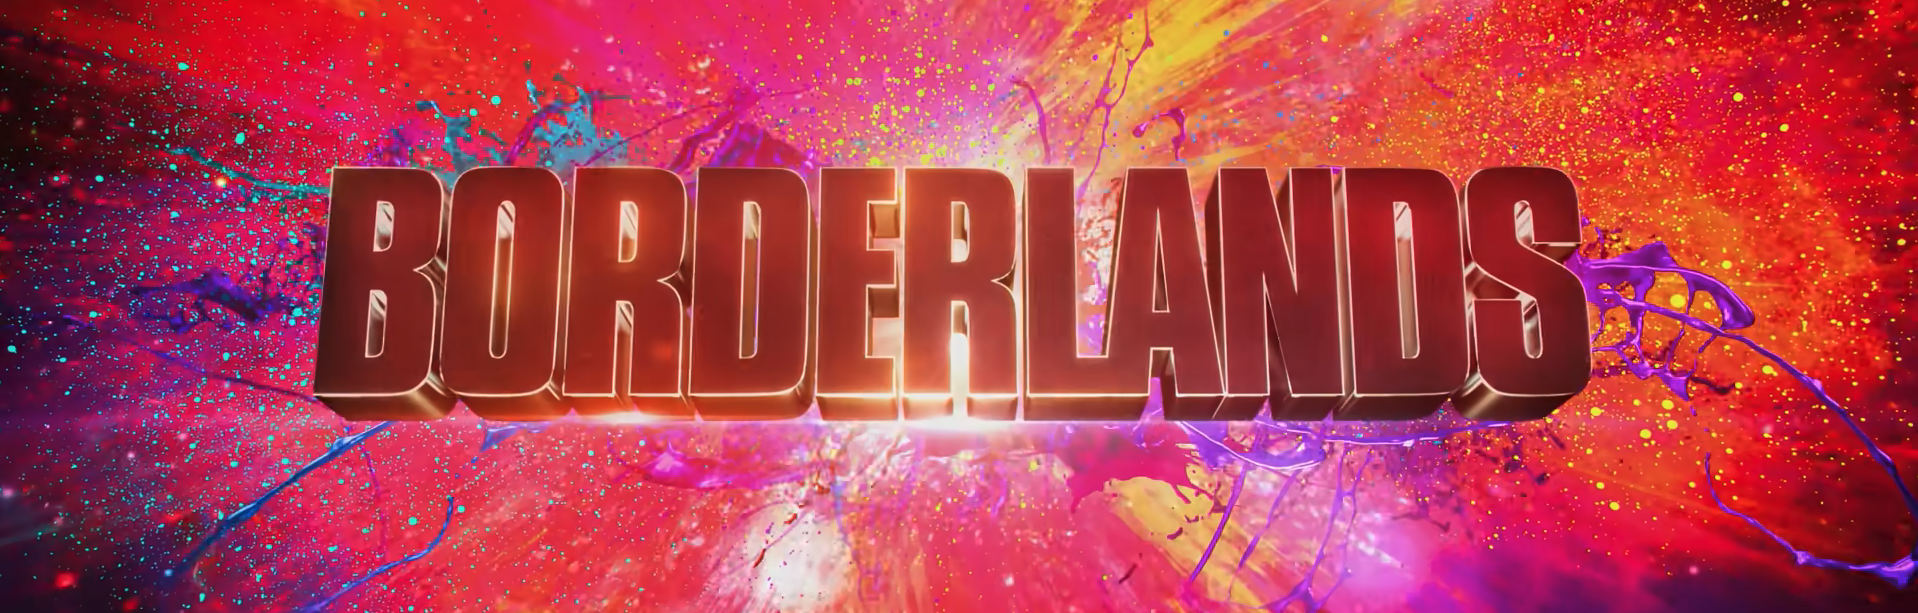 Featured image for “The First Trailer For Eli Roth’s “Borderlands” Film Is Bonkers…And We Can’t WAIT!”